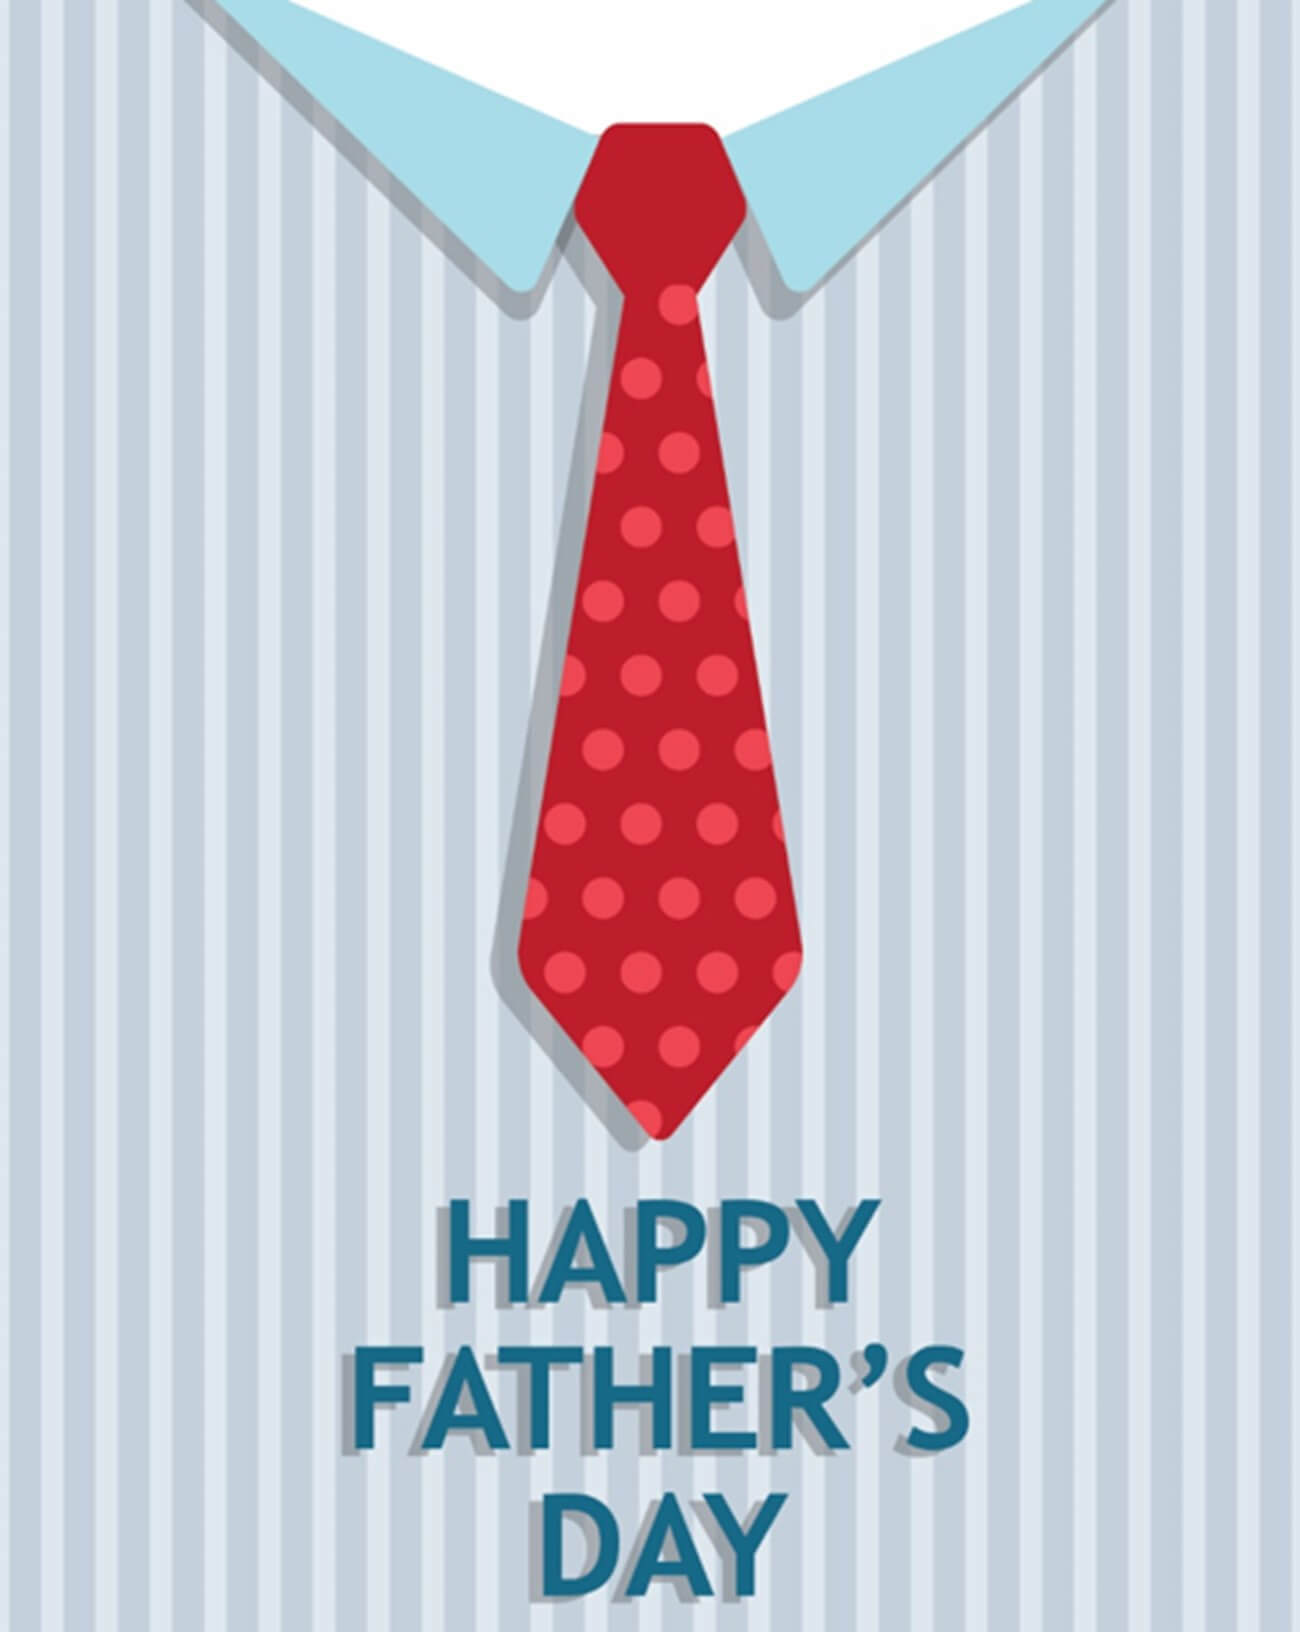 Tie Father's Day Card (Quarter Fold) In Quarter Fold Card Template